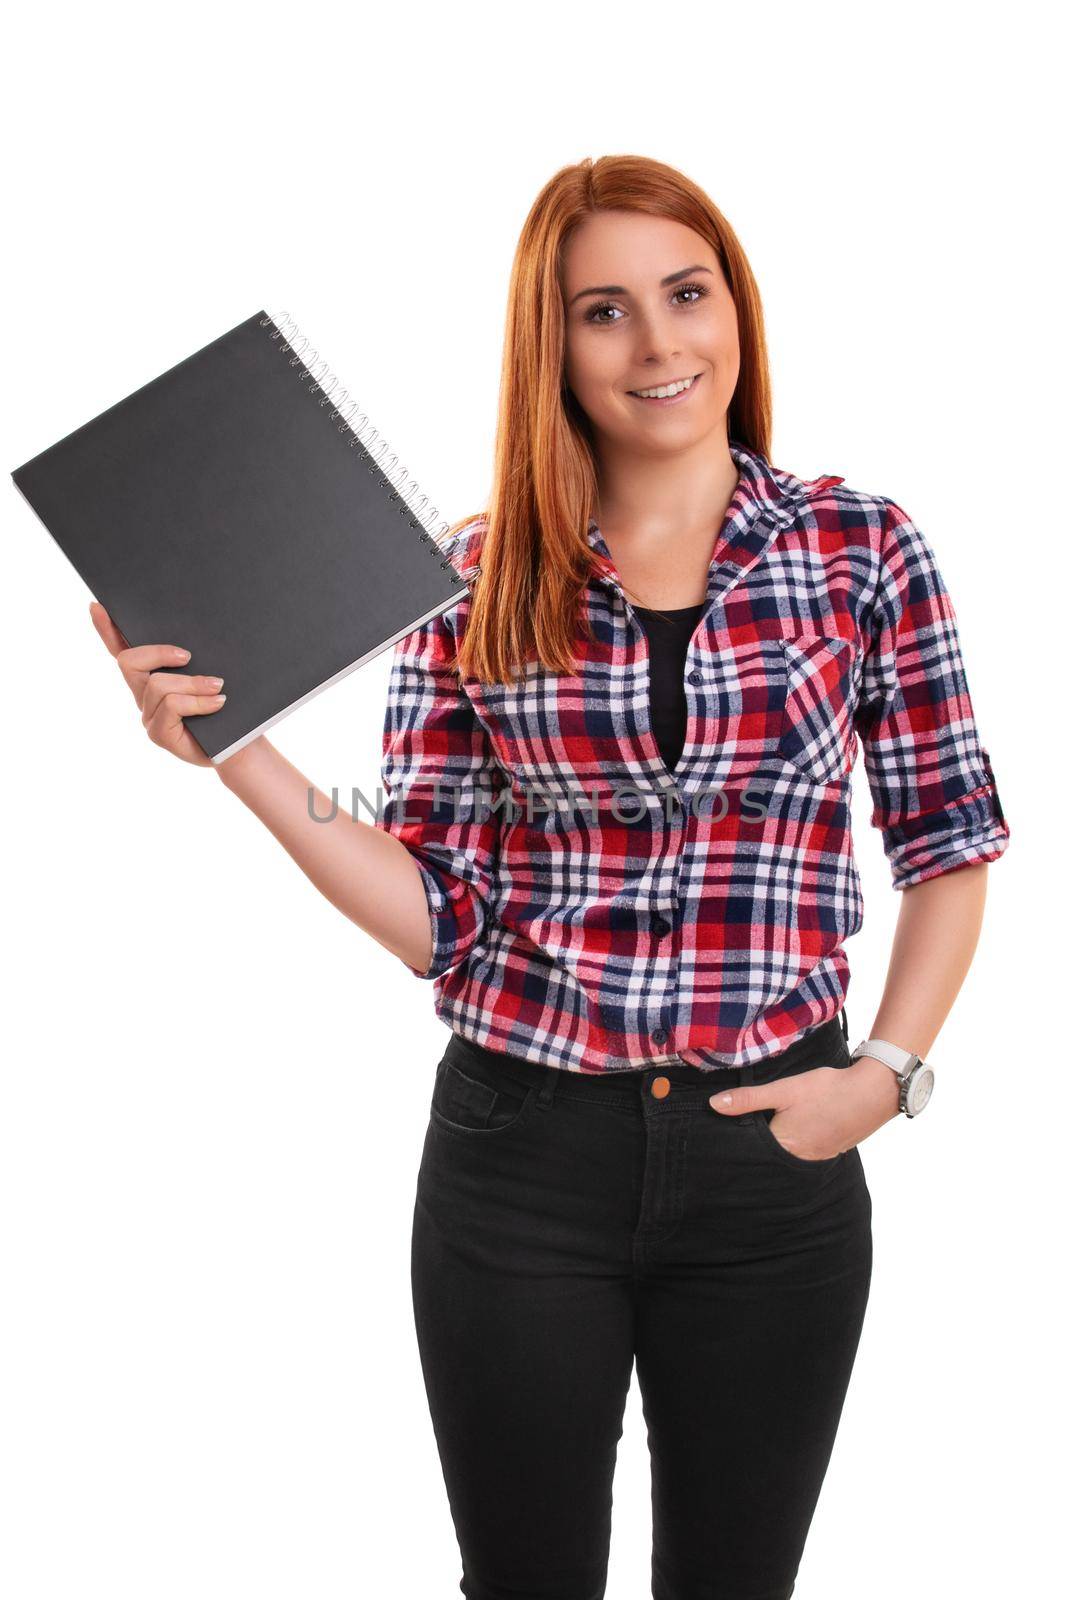 Smiling young redhead woman in plaid shirt holding a notebook in the hand, isolated on white background. Education, study, exams, achievement concept.